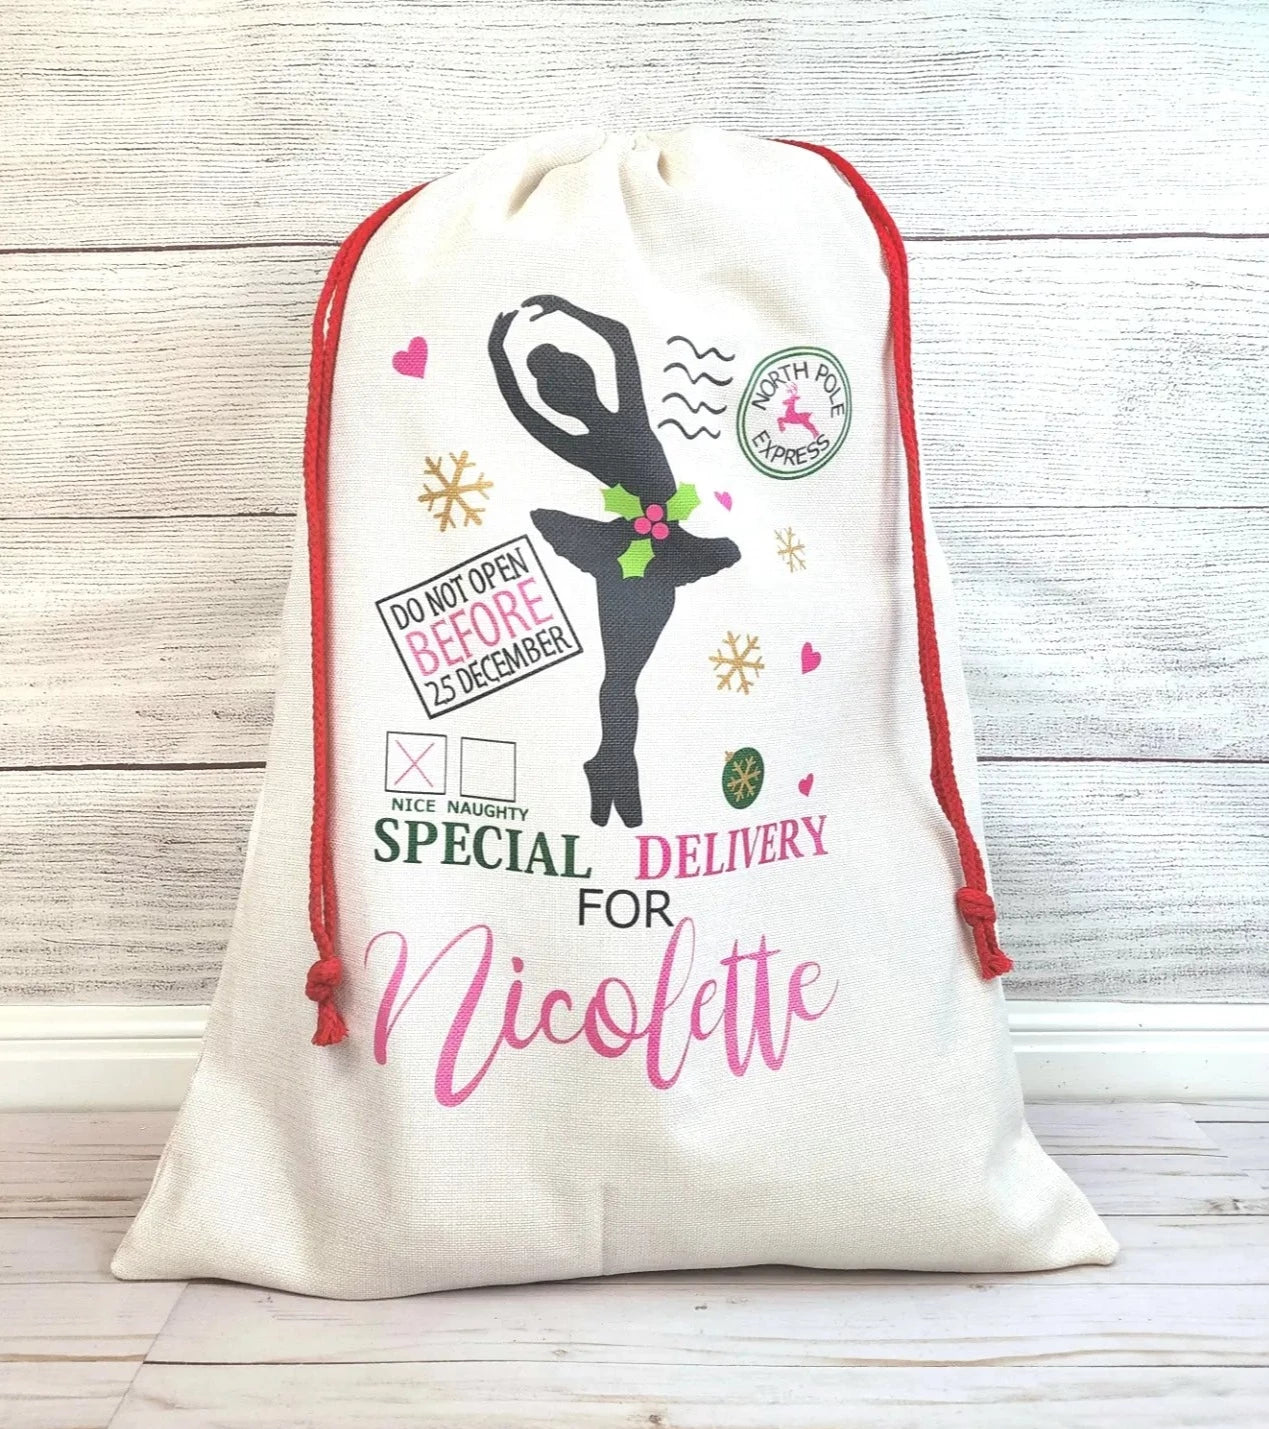 Giant santa toy sack with an image of a ballerina that is customizable with child's name.